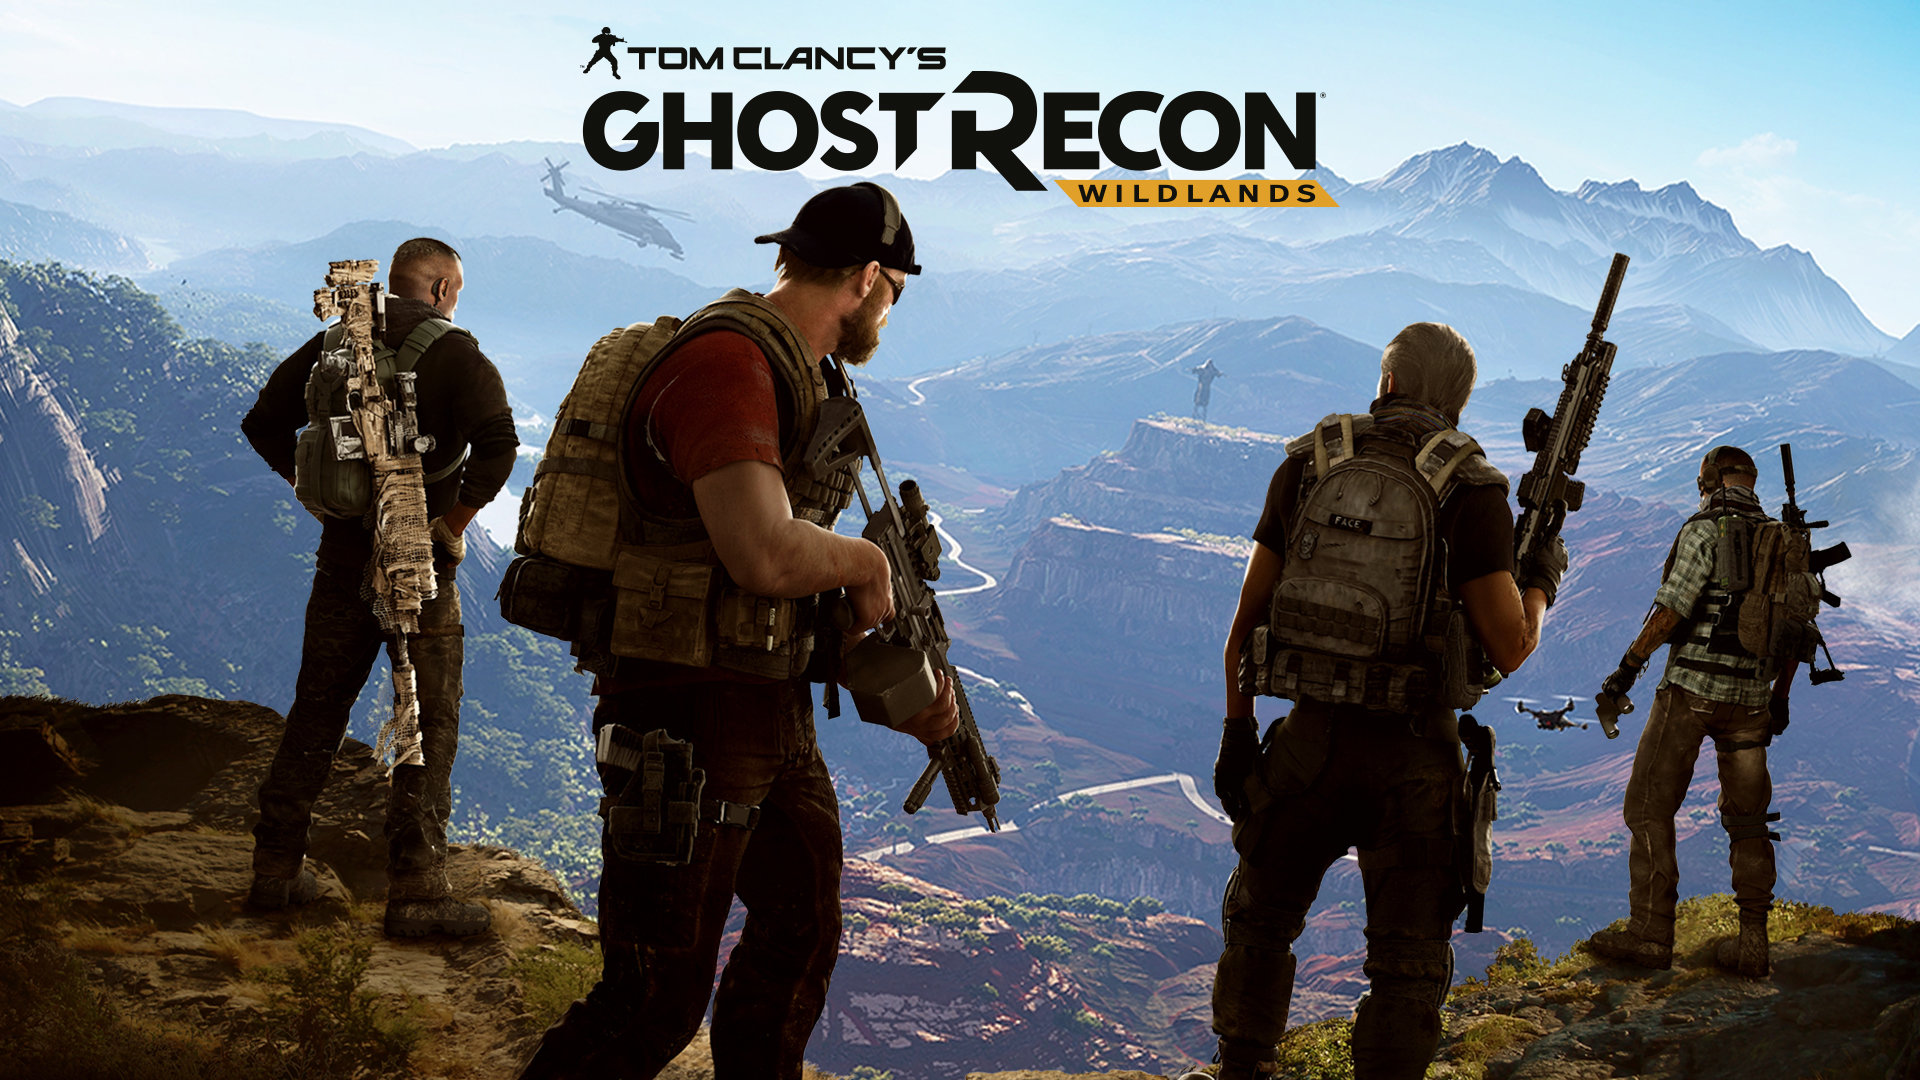 Awesome Tom Clancy's Ghost Recon Wildlands free wallpaper ID:62424 for full hd 1080p computer